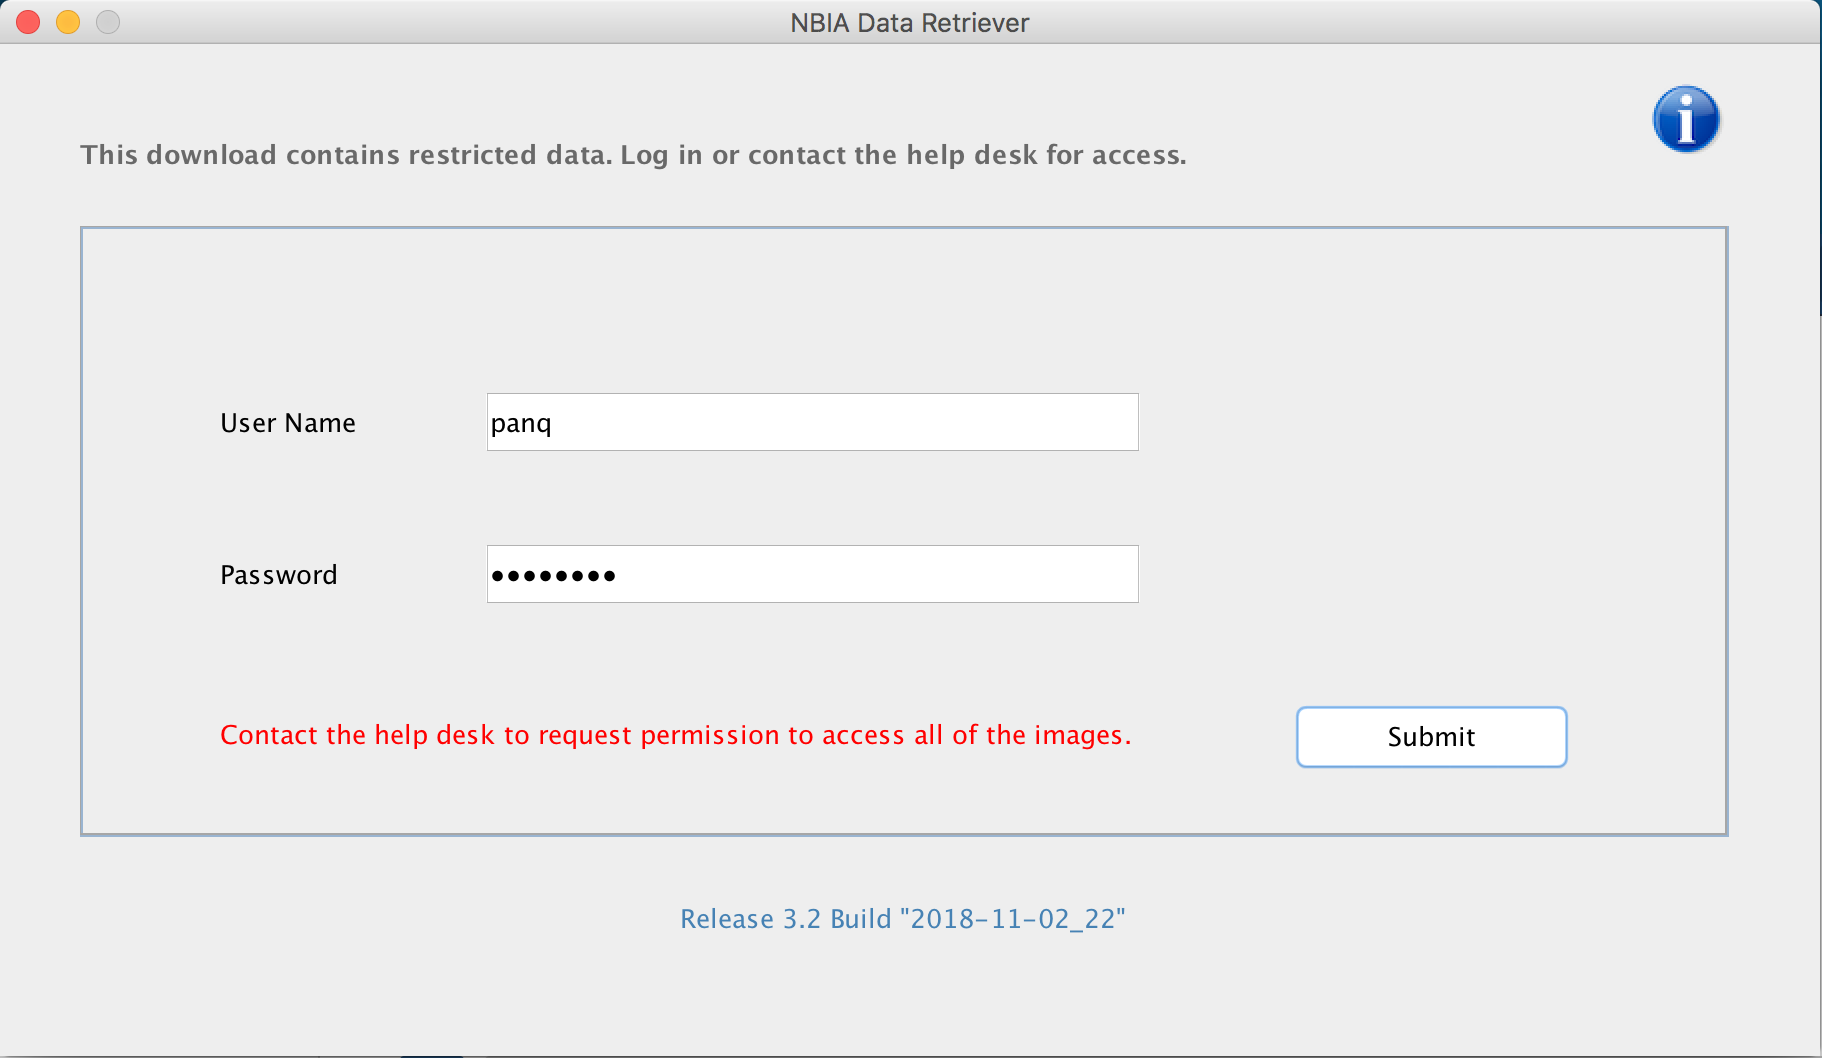 TCIA Downloader contact the help desk to request permission to access all of the images